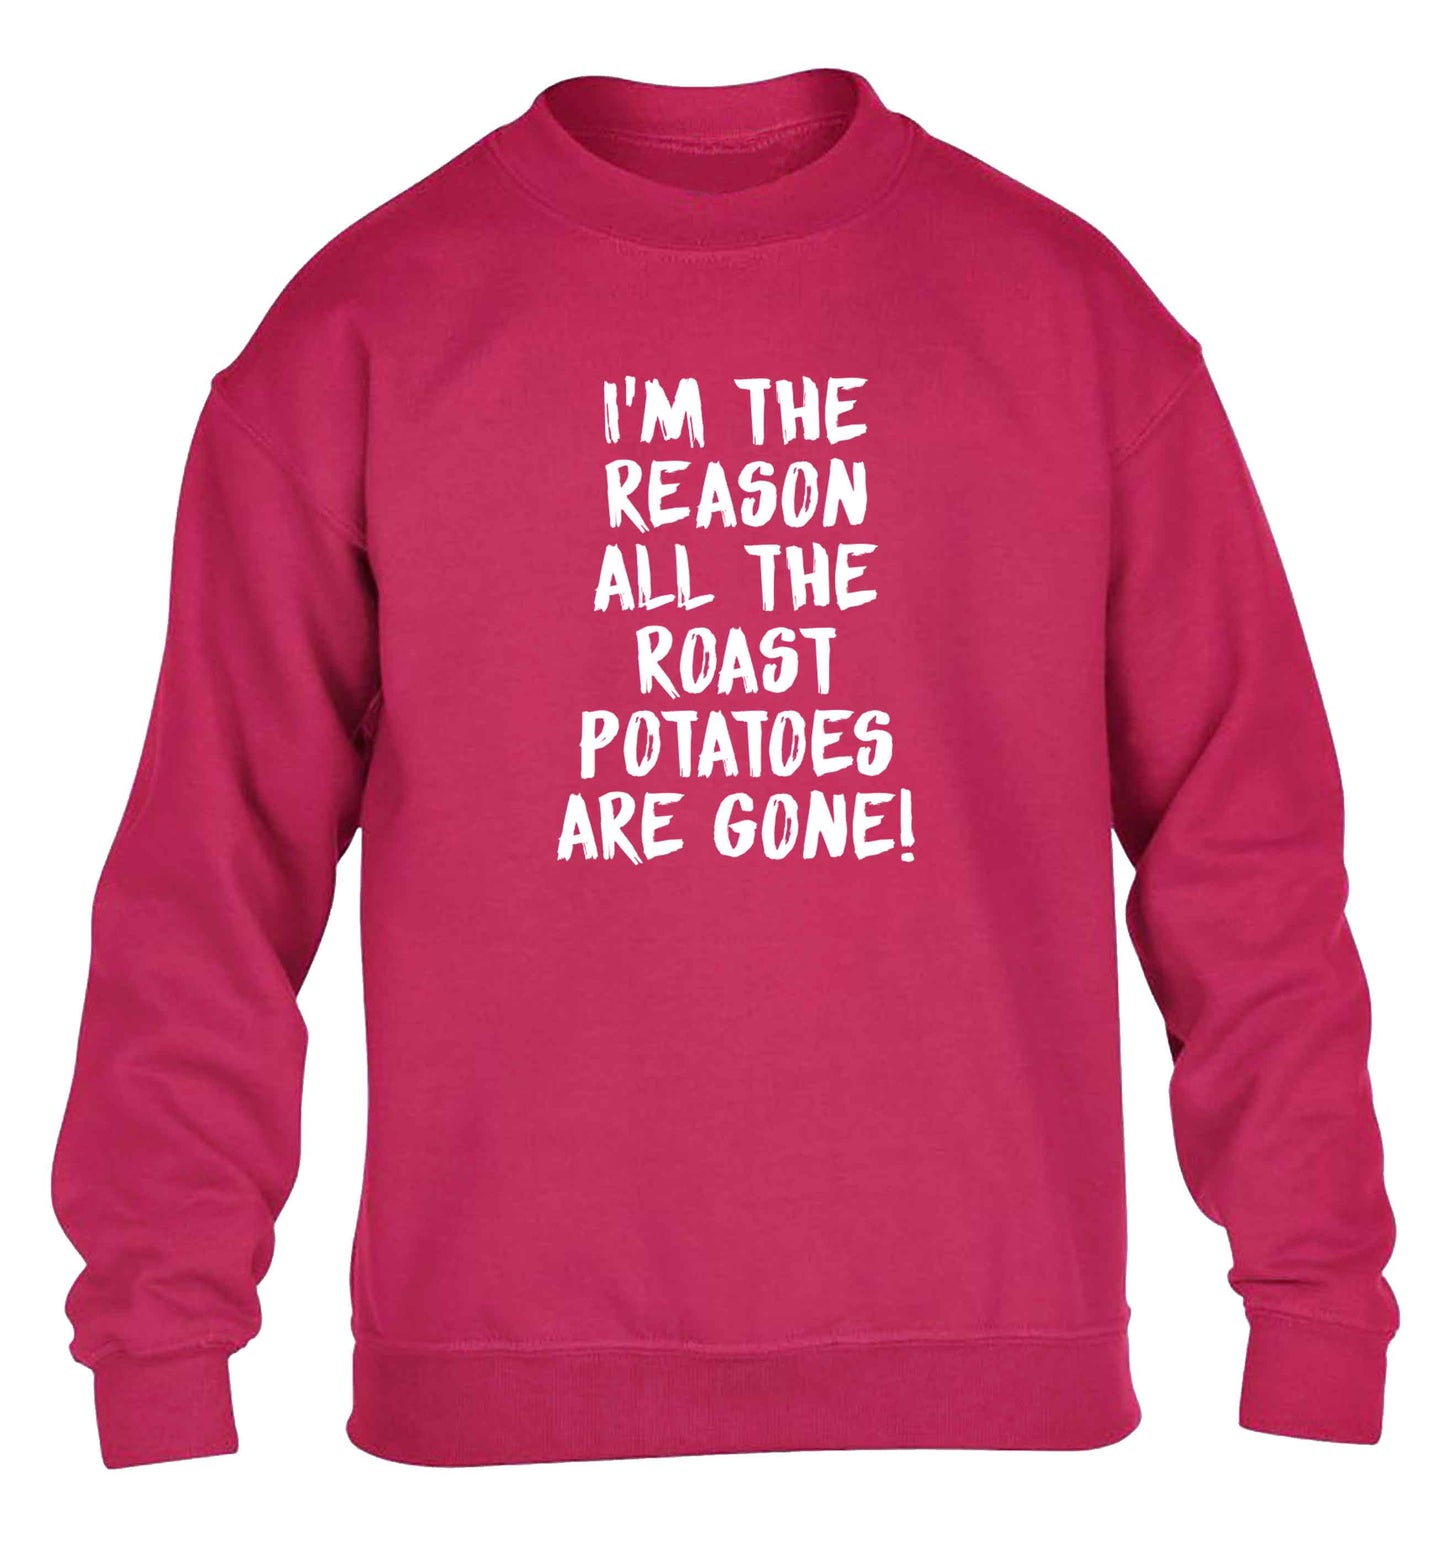 I'm the reason all the roast potatoes are gone children's pink sweater 12-13 Years